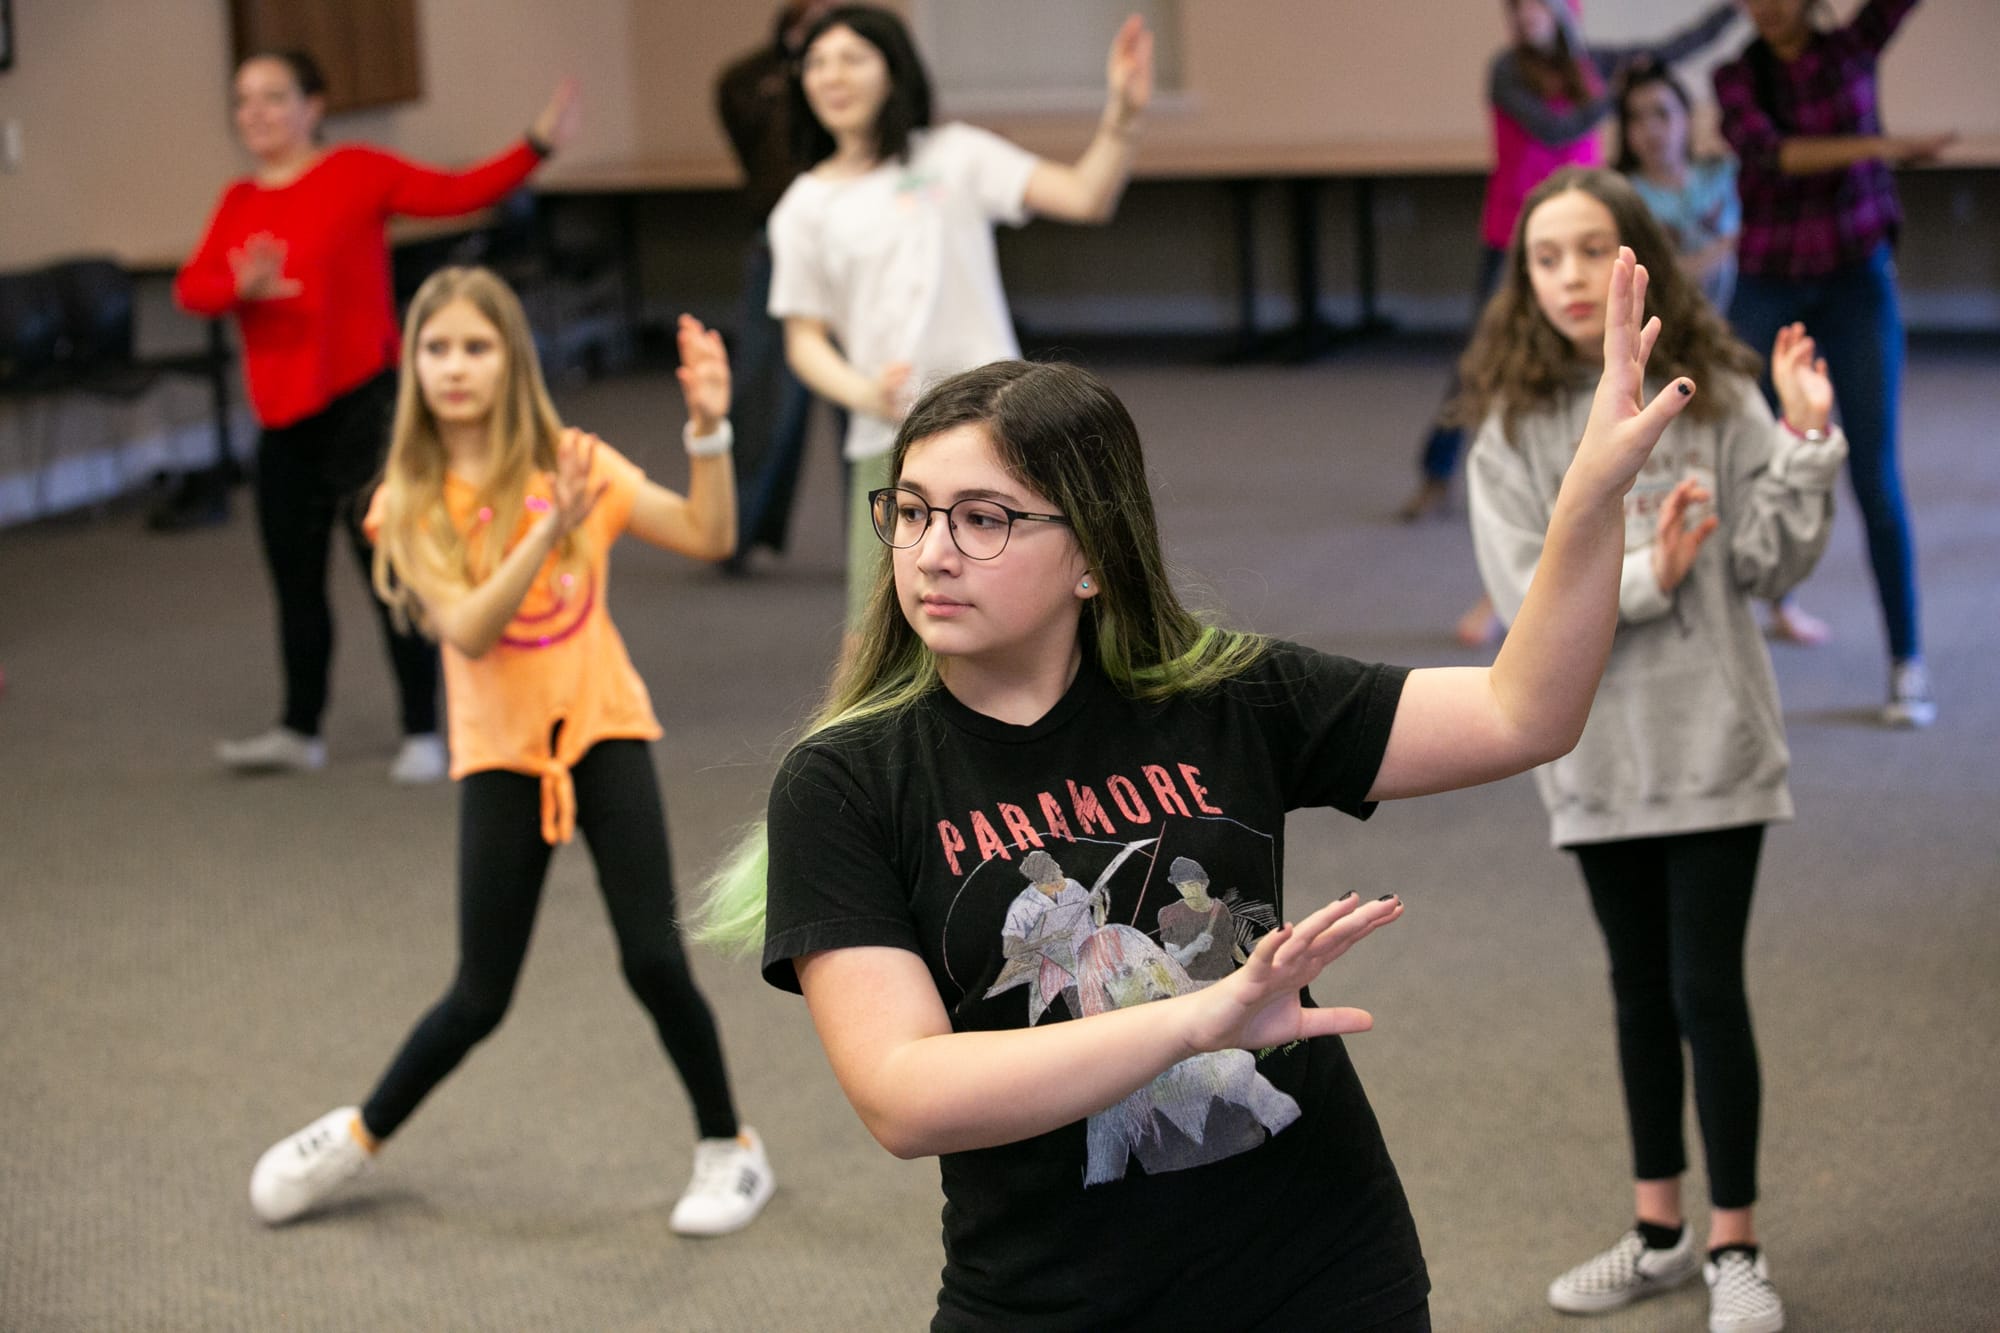 Isabella Prator, 12, learns Bollywood dance moves with dance instructor and artist, Monika Deshpande at a free cultural event for teens at the Camas Public Library on Saturday afternoon.